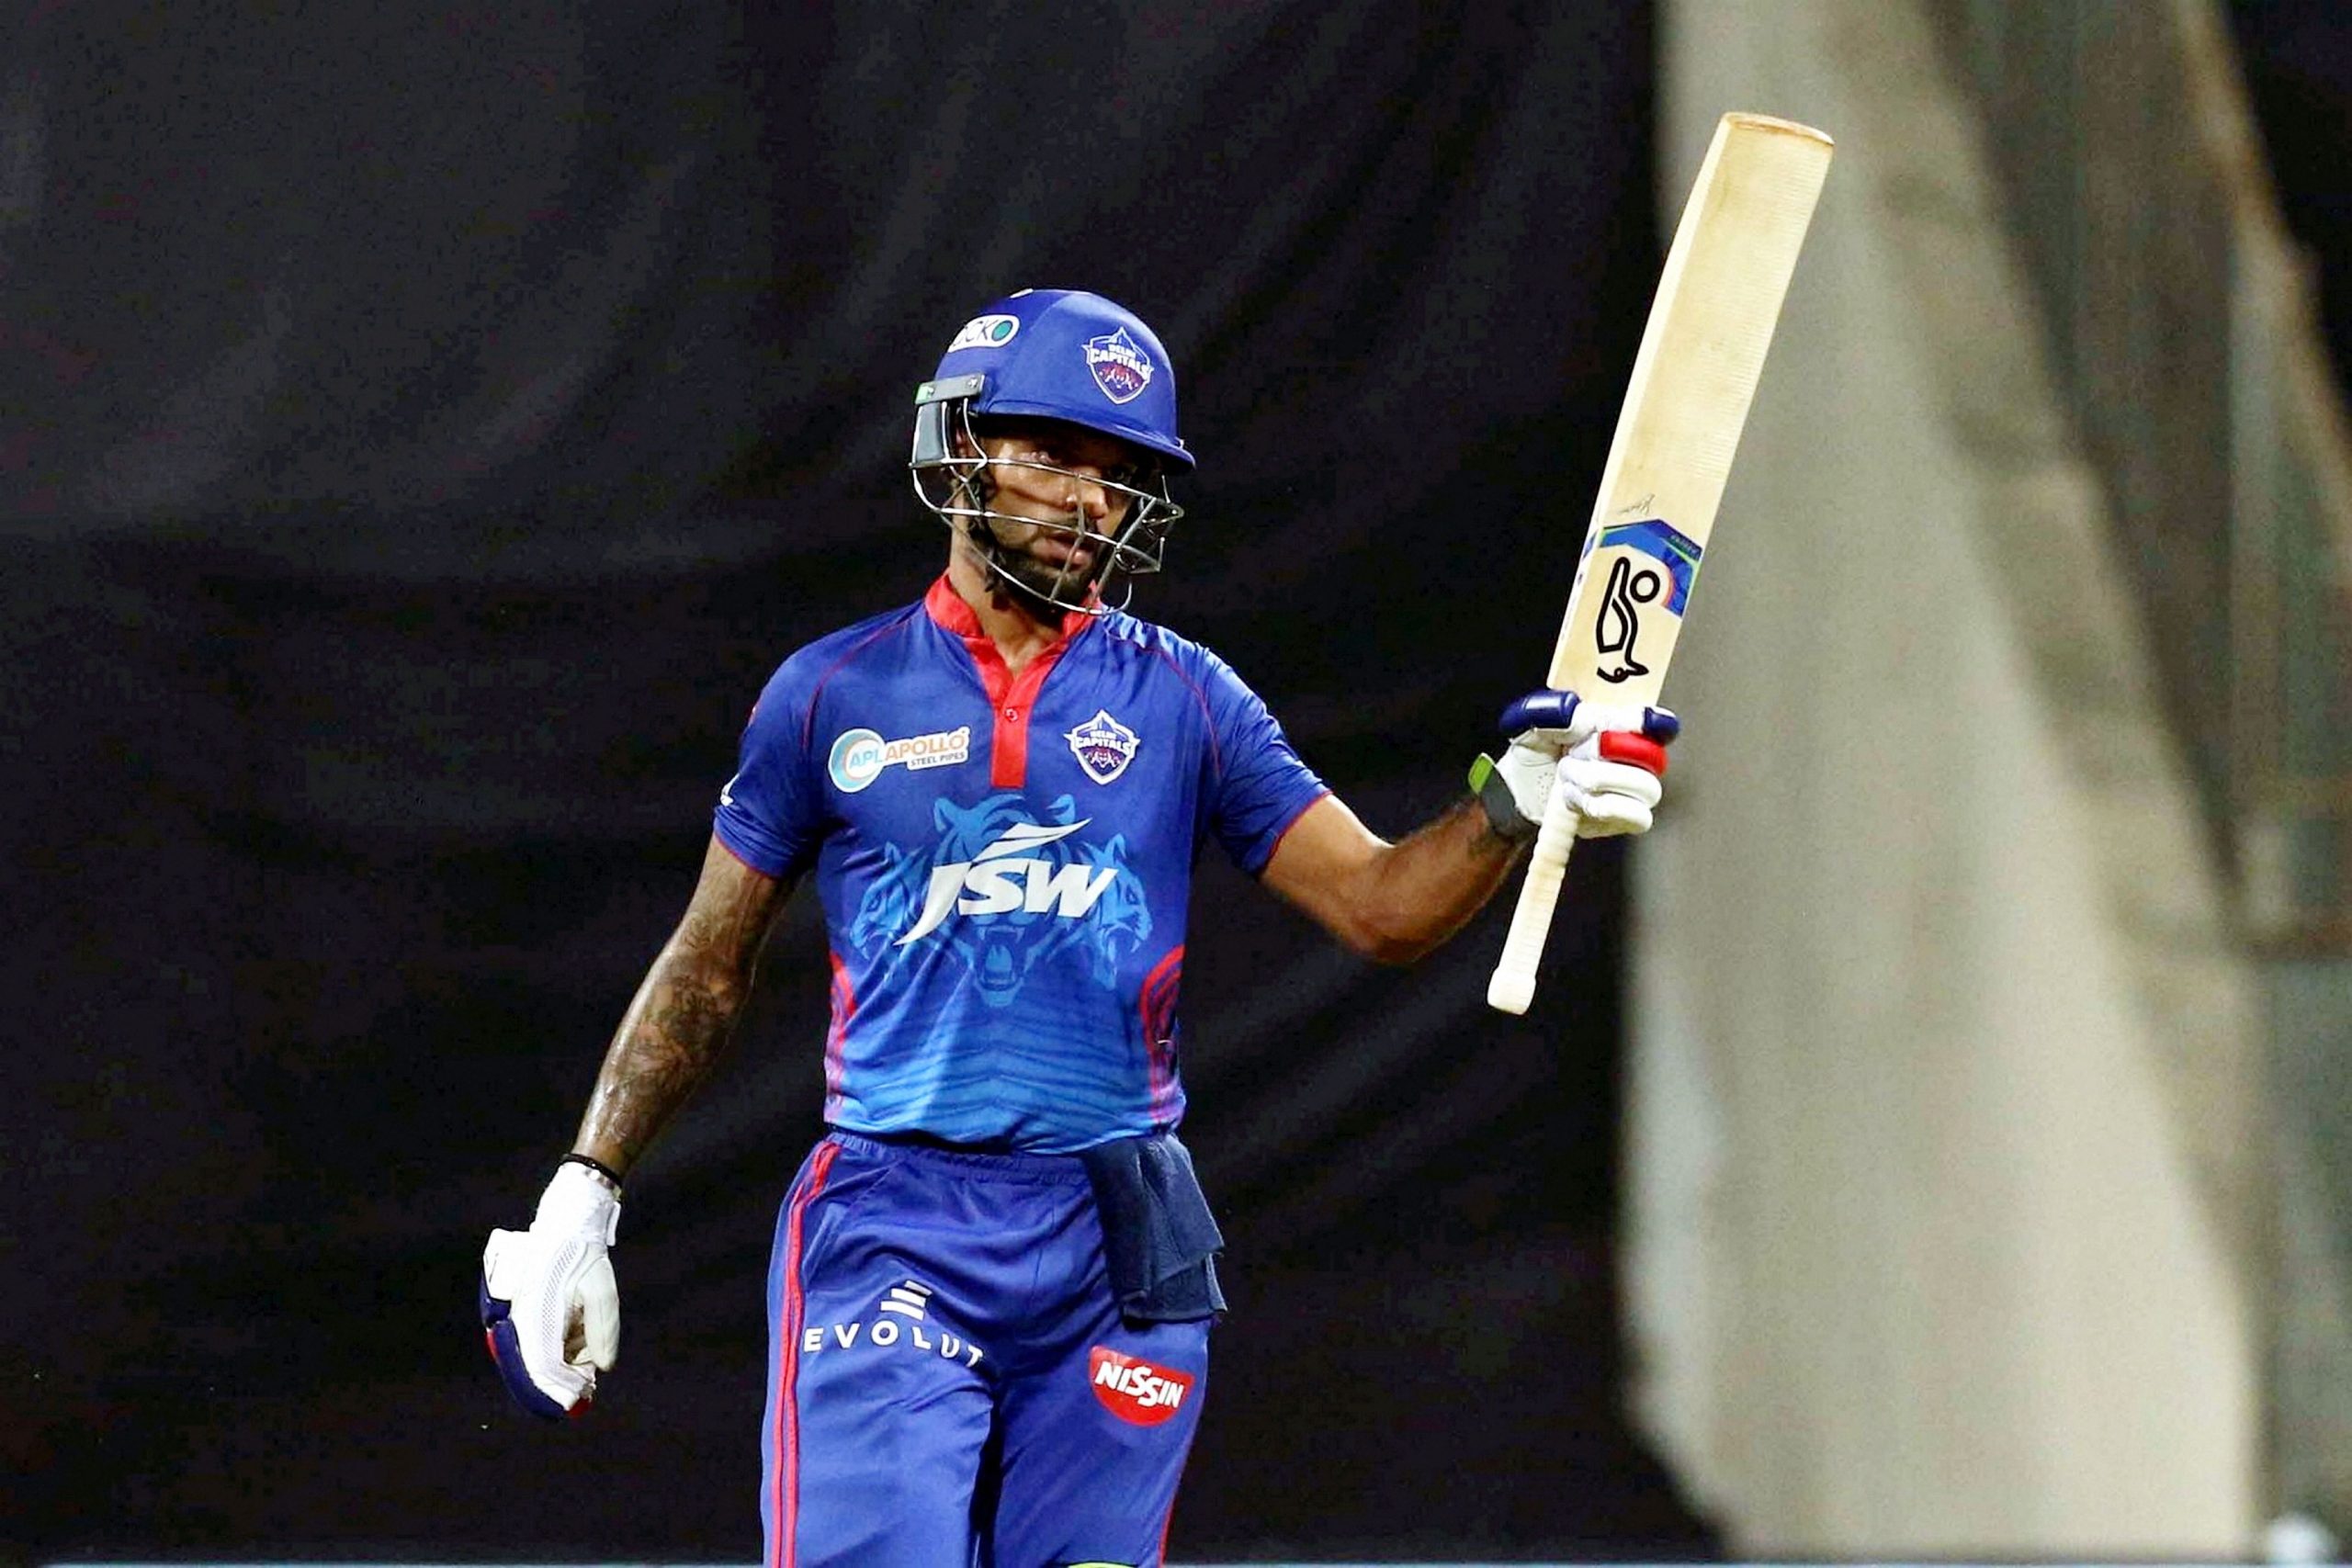 Challenge will be to switch mentally: DC’s Shikhar Dhawan ahead of match against MI